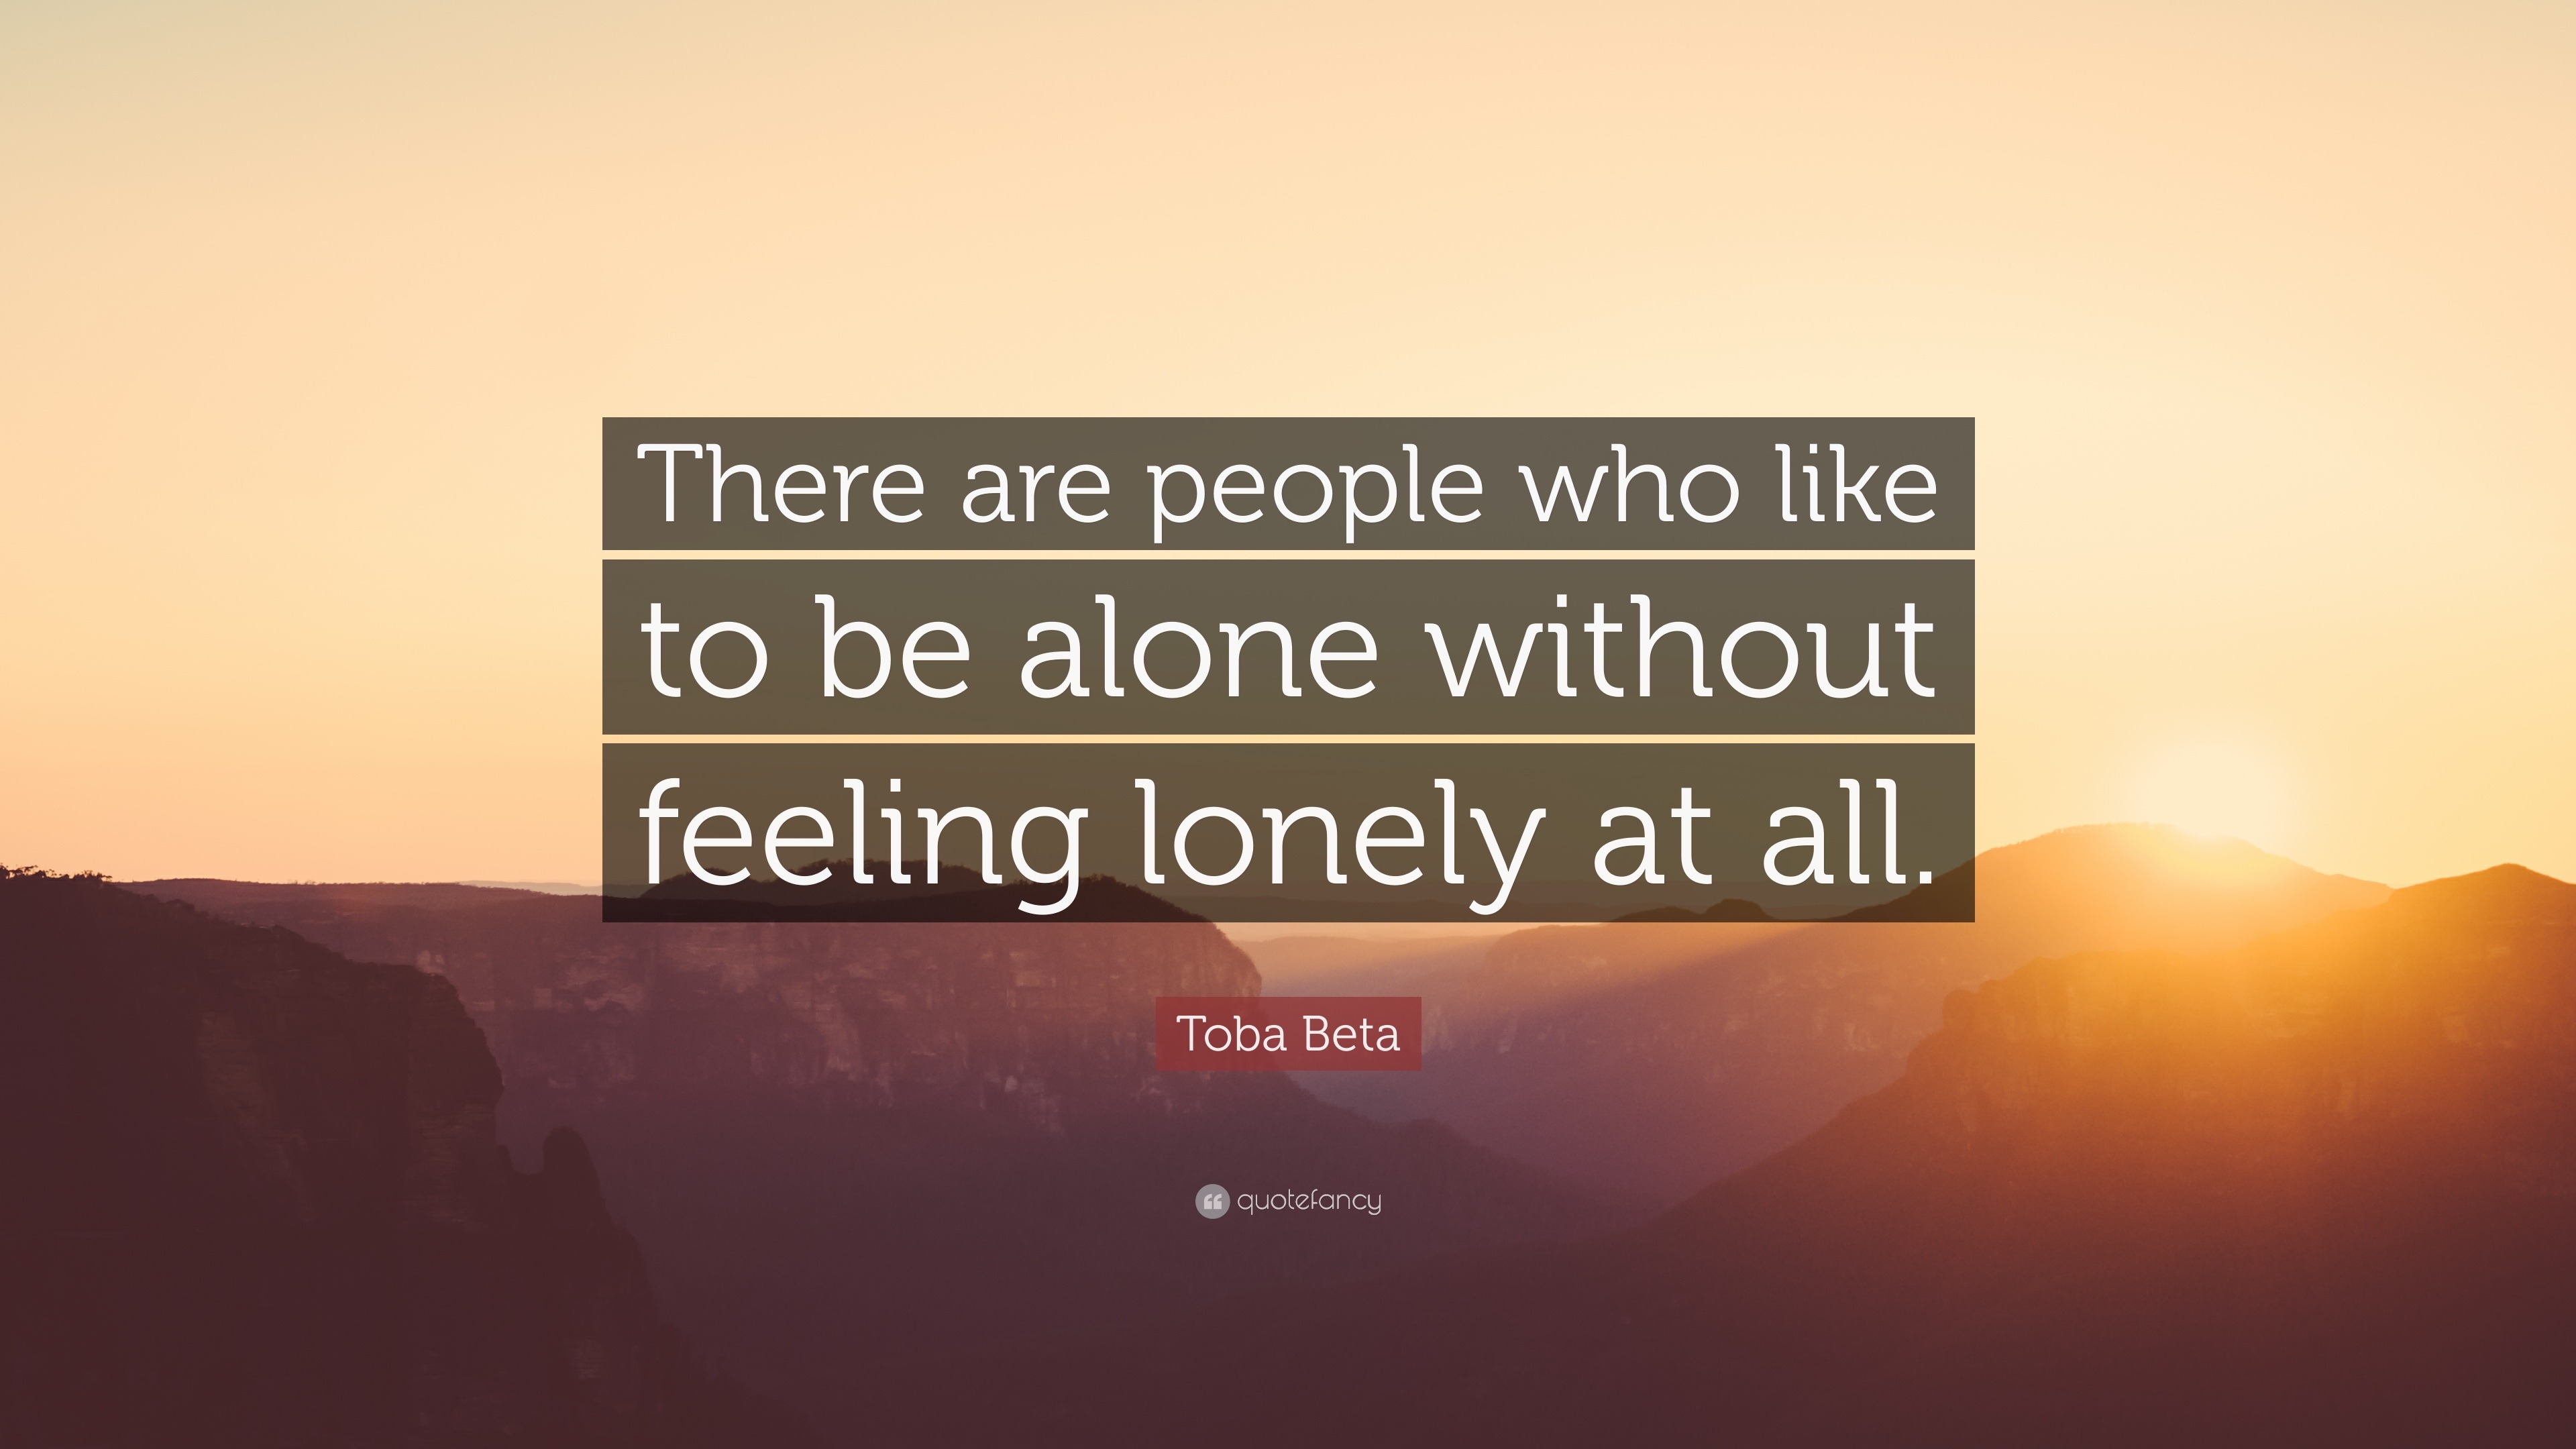 Toba Beta Quote: “There are people who like to be alone without feeling ...